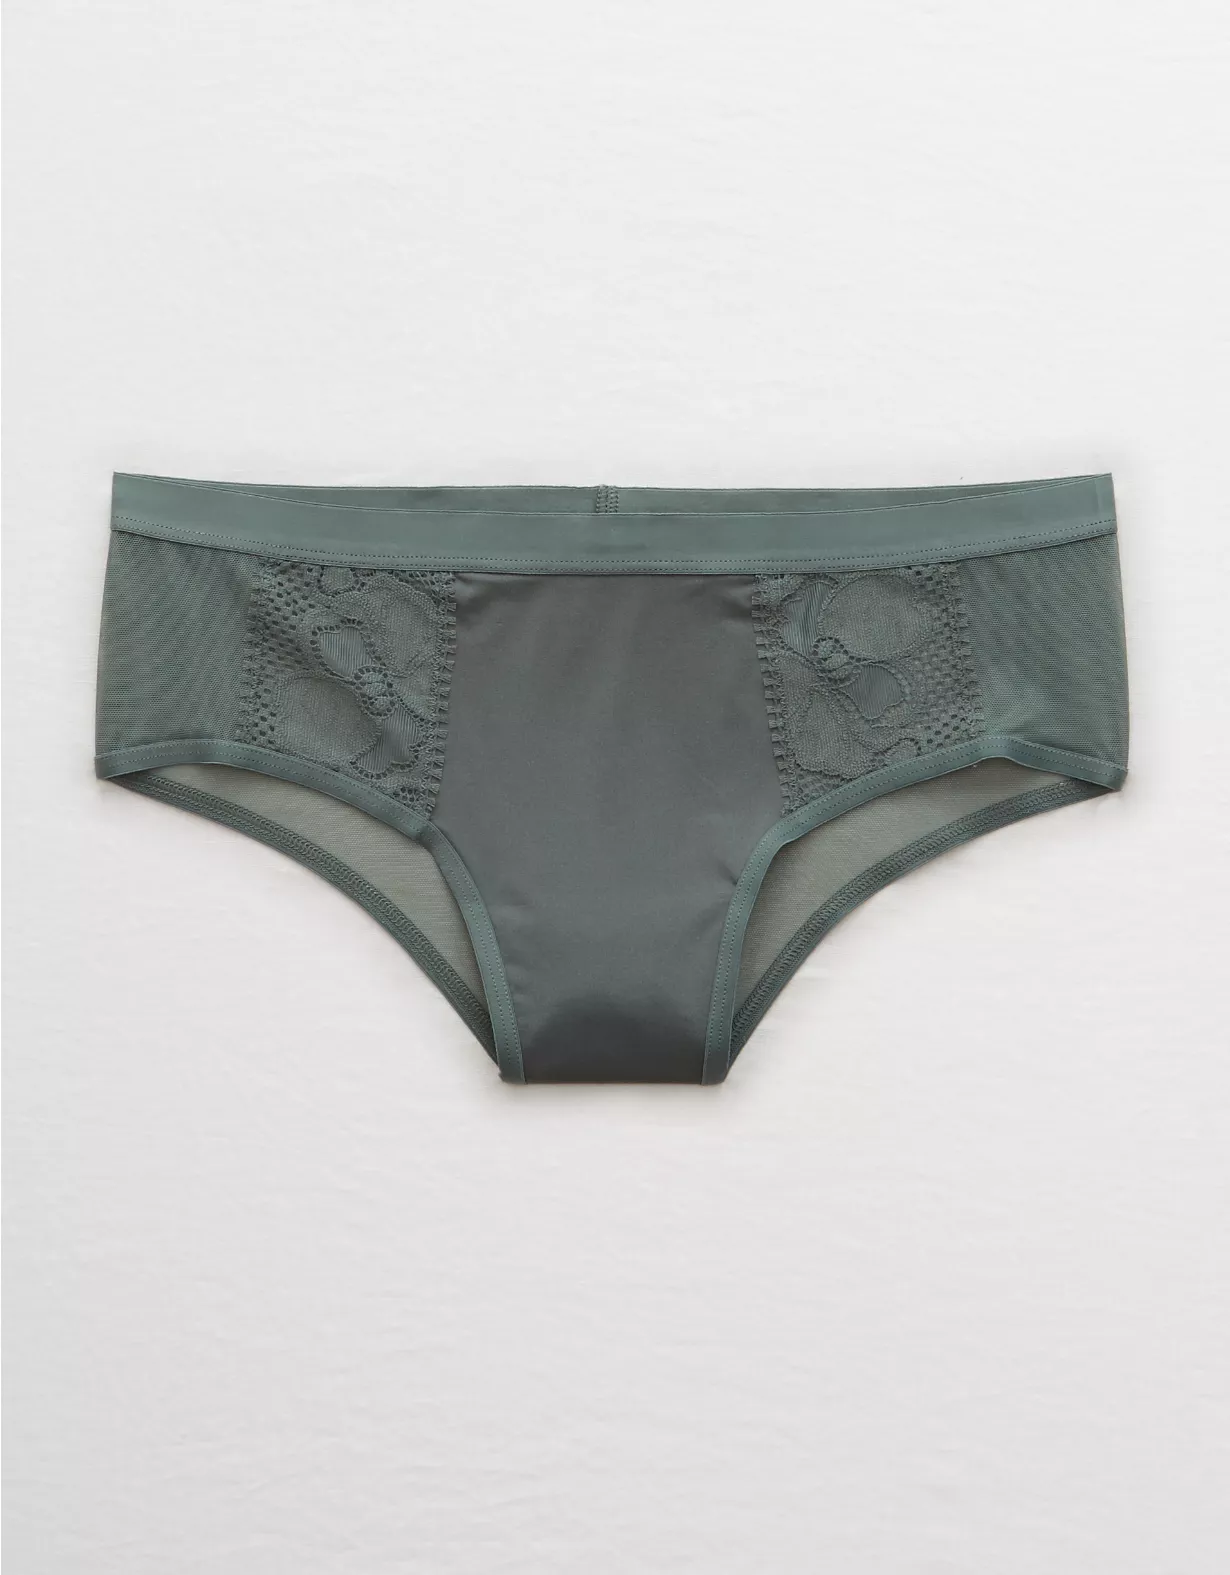 Aerie Paradise Lace Shine Cheeky Underwear